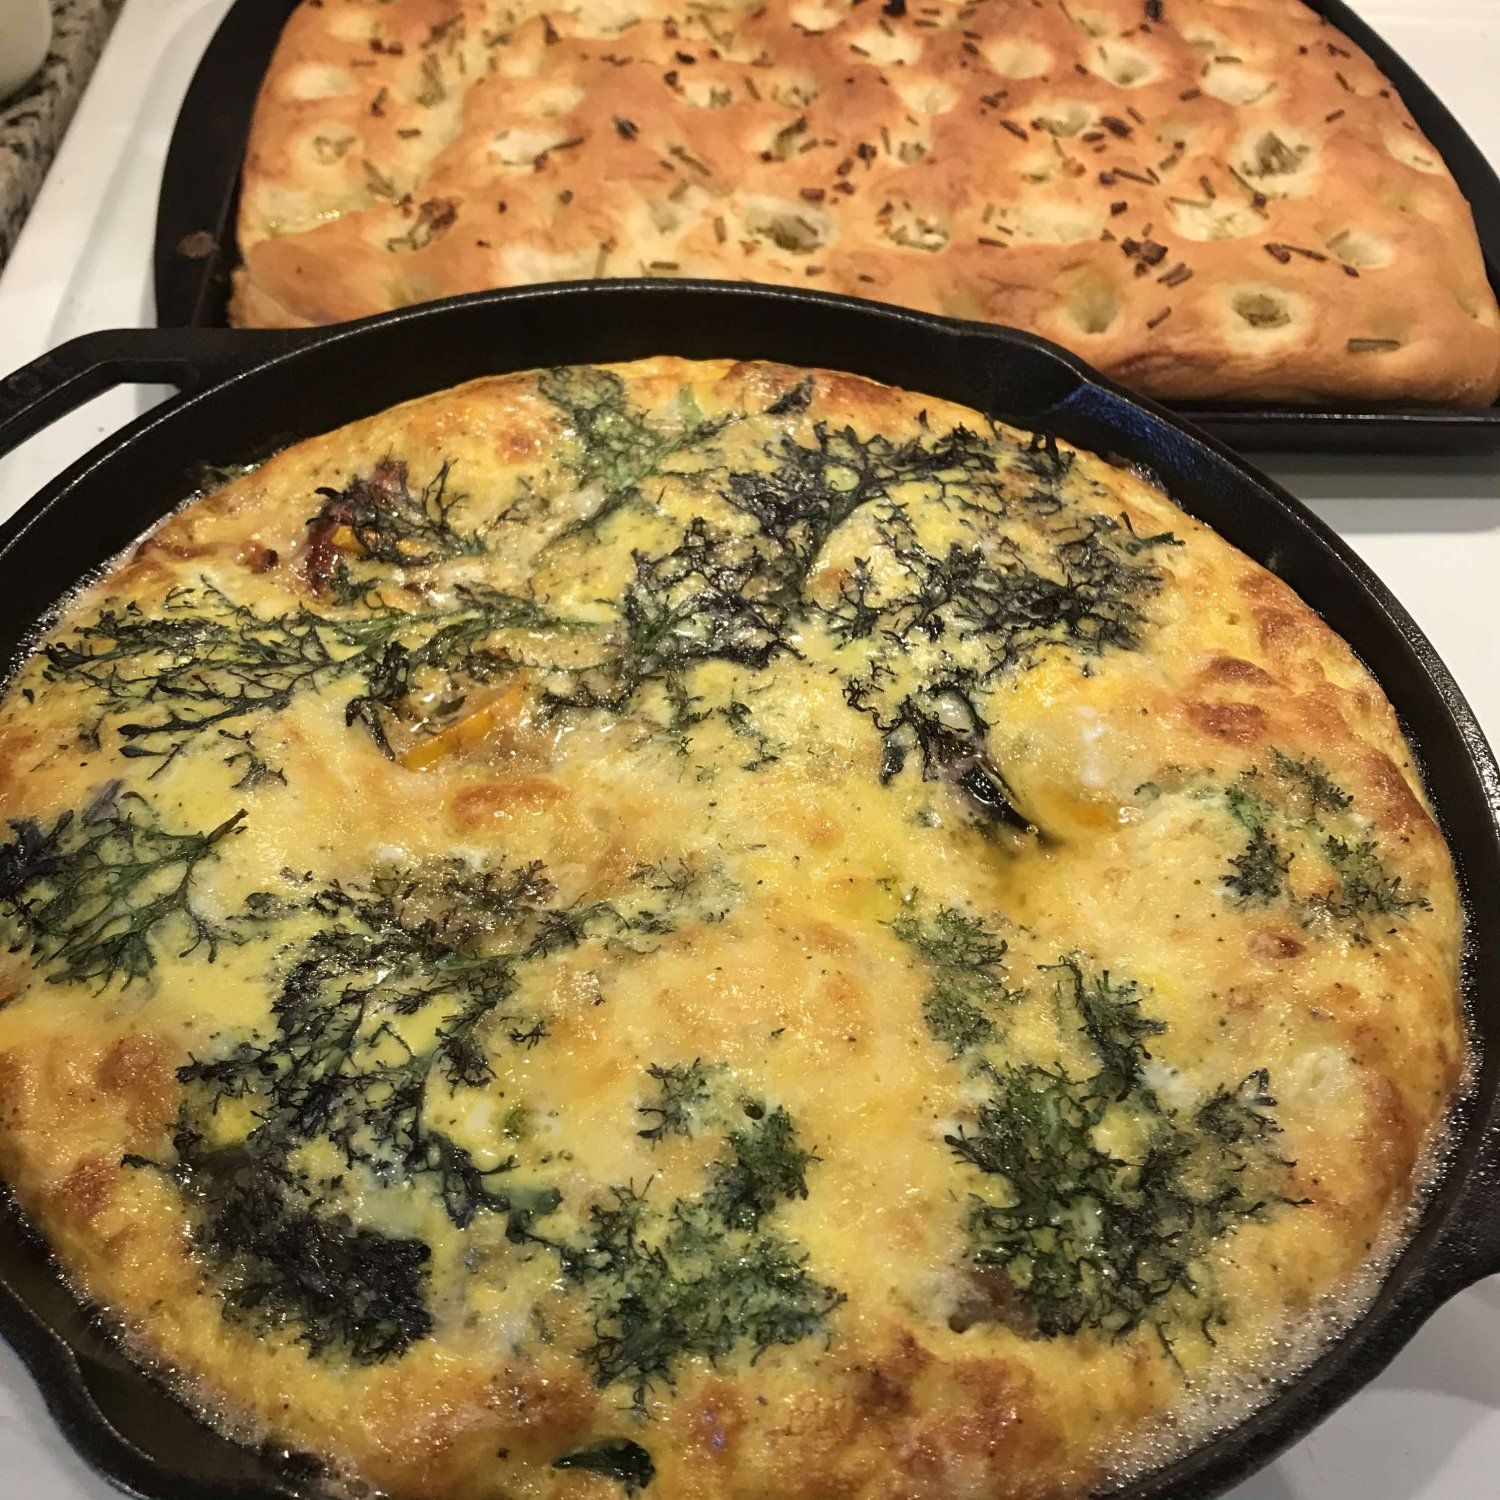 Next Happening: Last Spring Share, A frittata and kimchi?